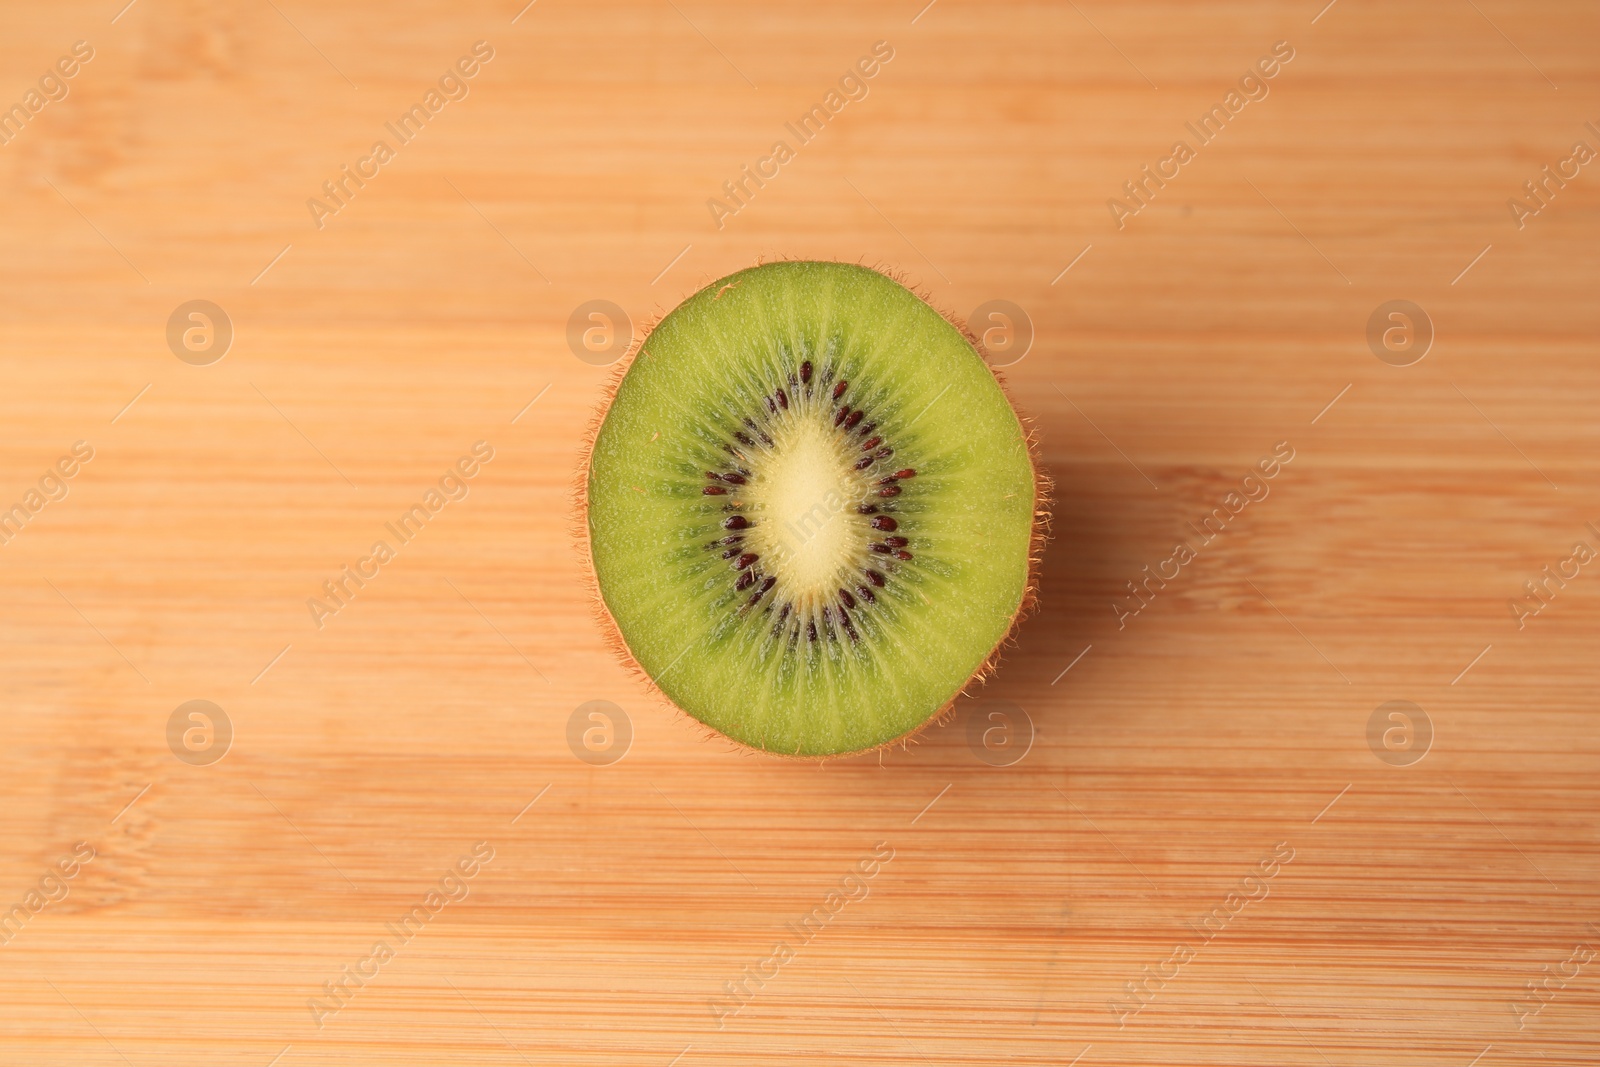 Photo of Half of fresh ripe kiwi on wooden table, top view